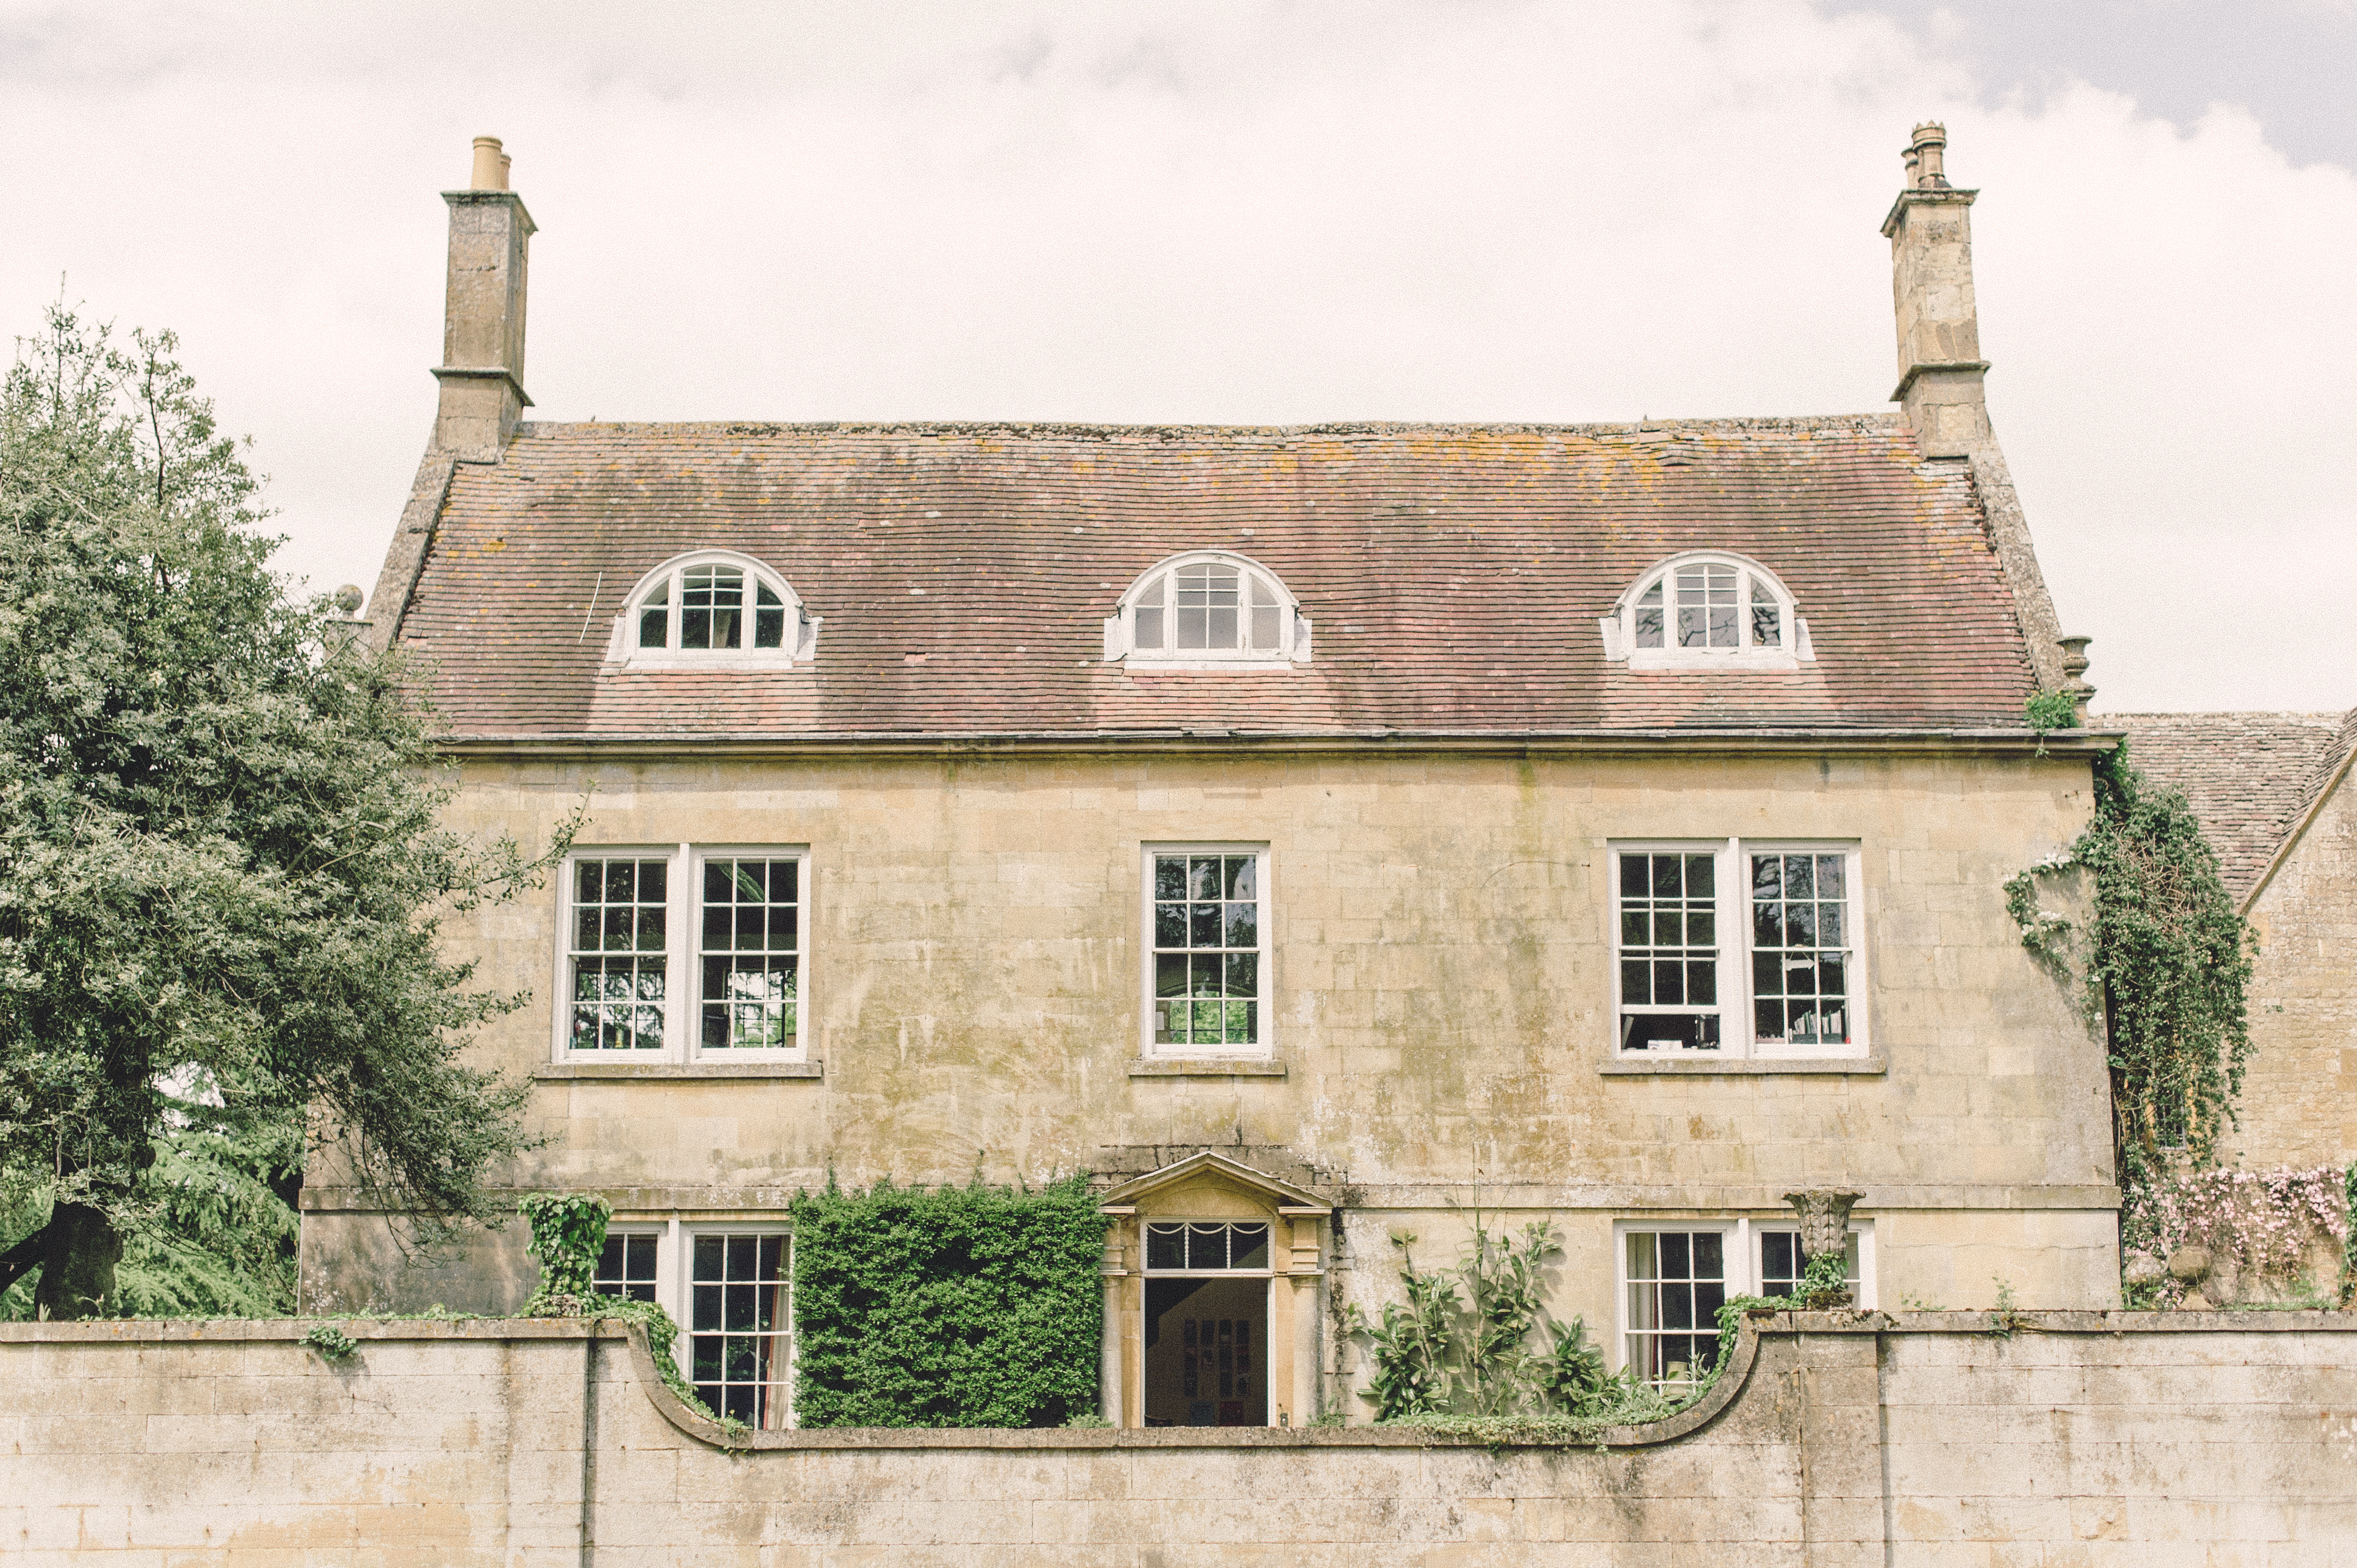 Home in the Hidcote Boyce Village of the Cotswolds